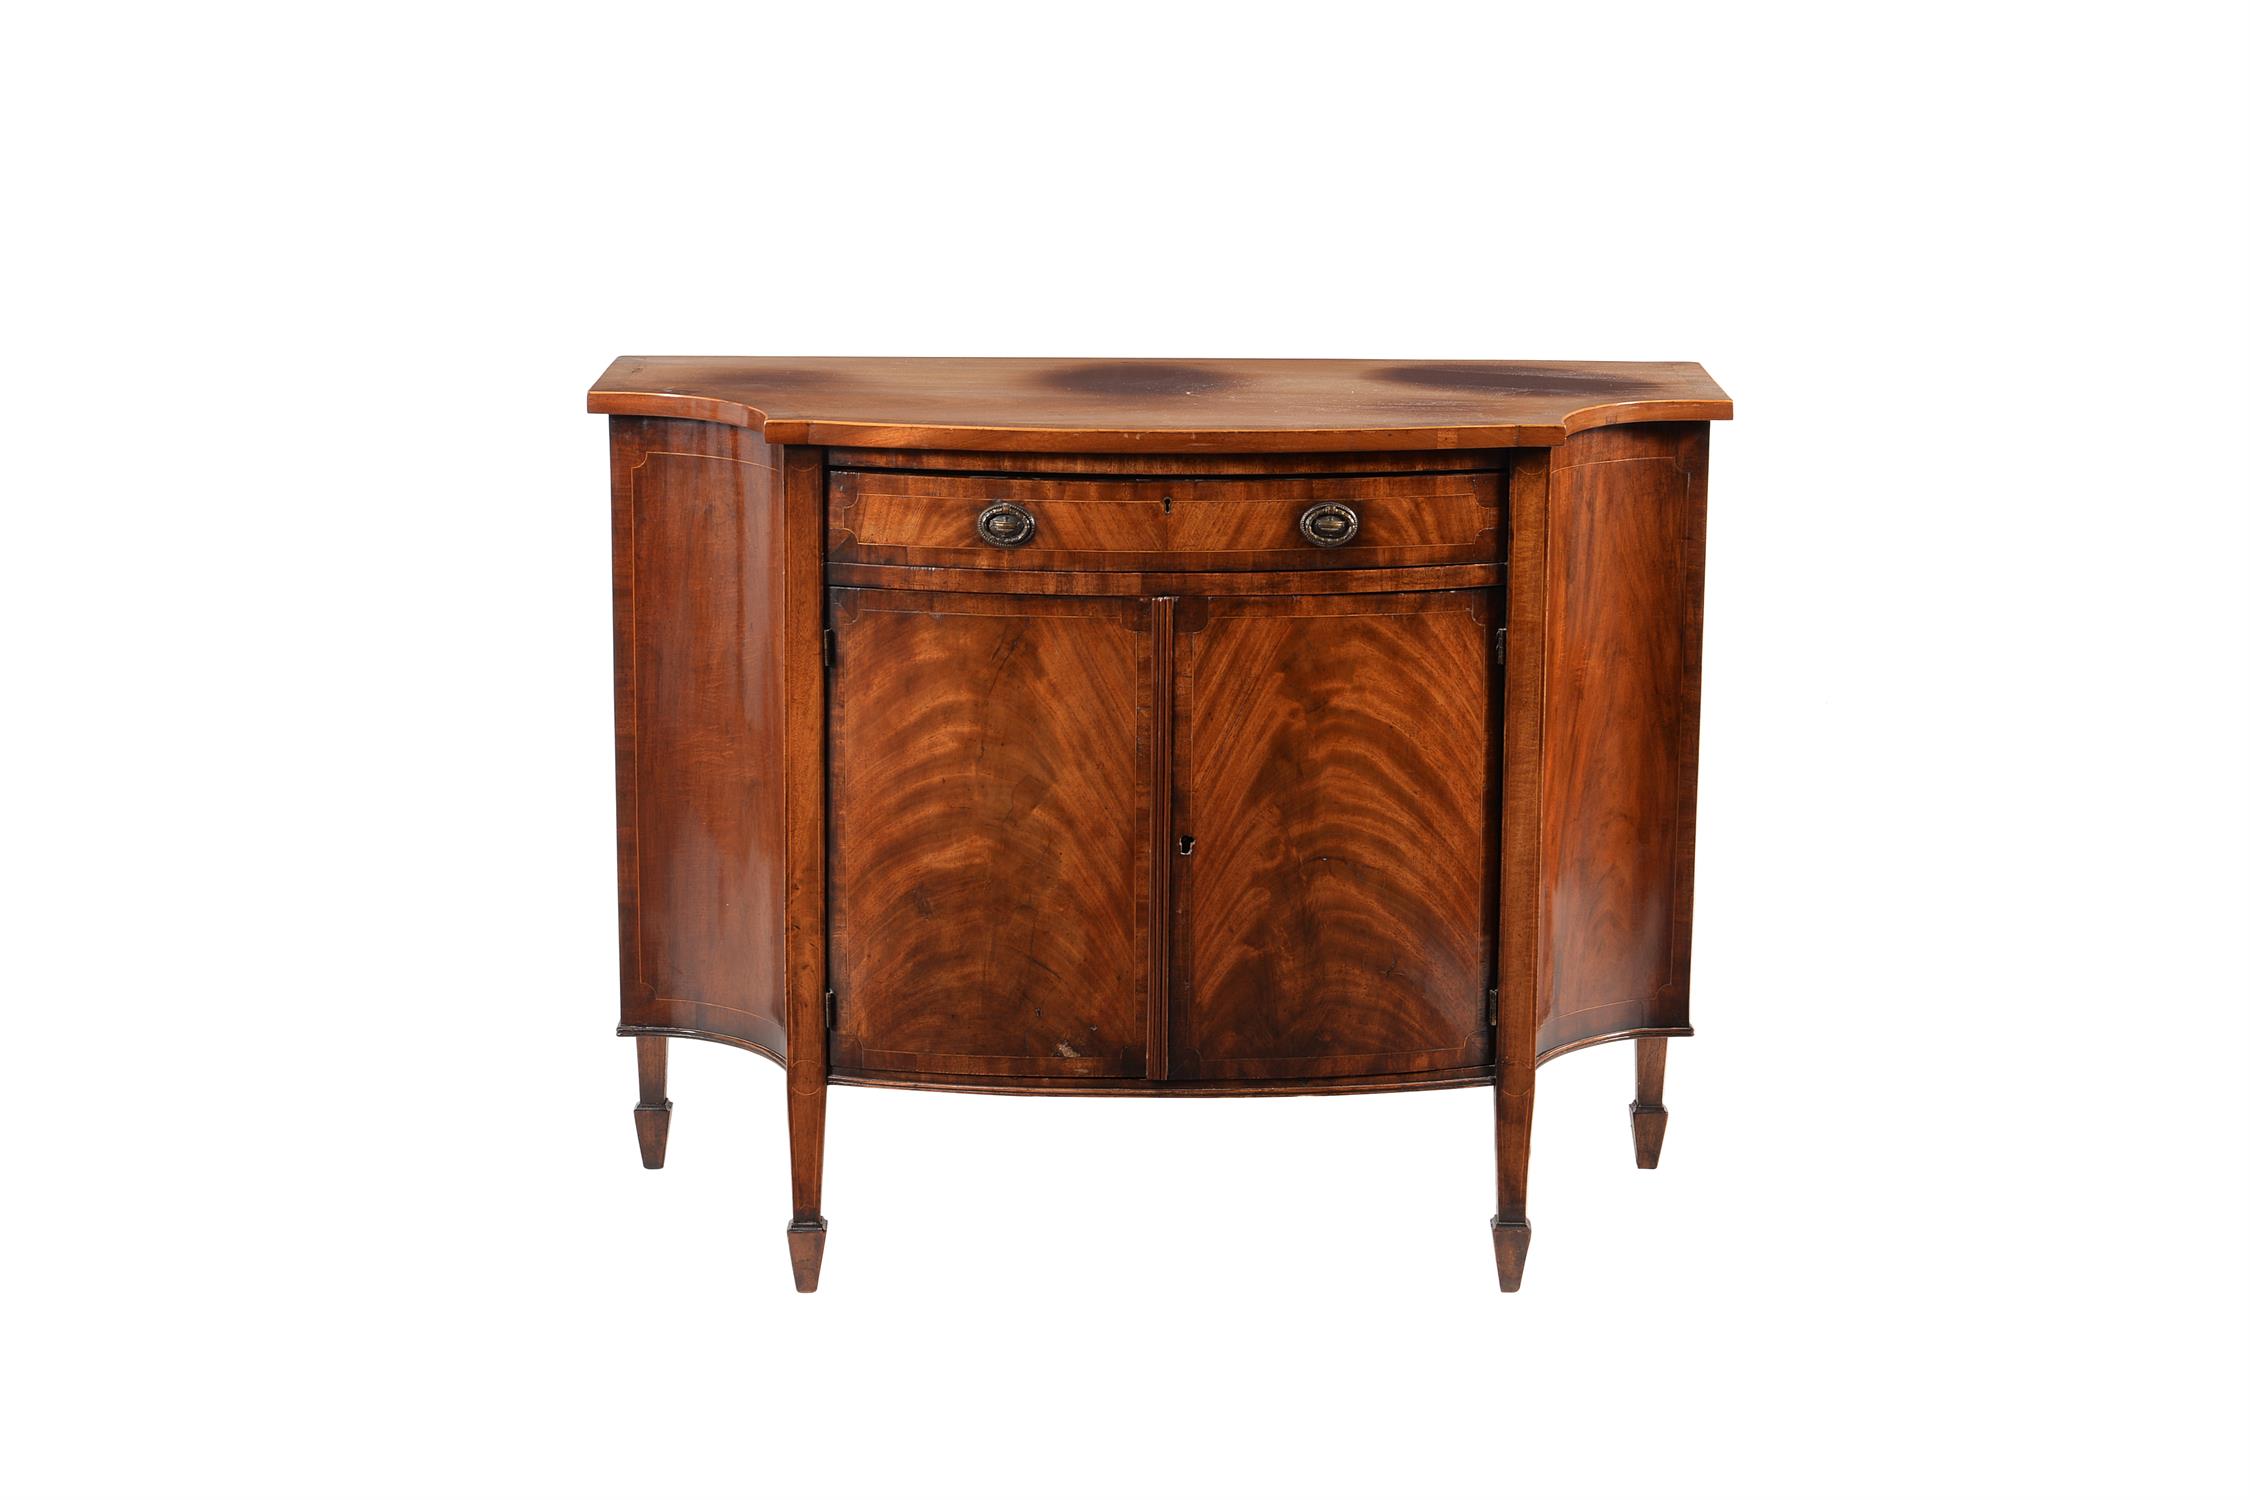 A mahogany and crossbanded side cabinet